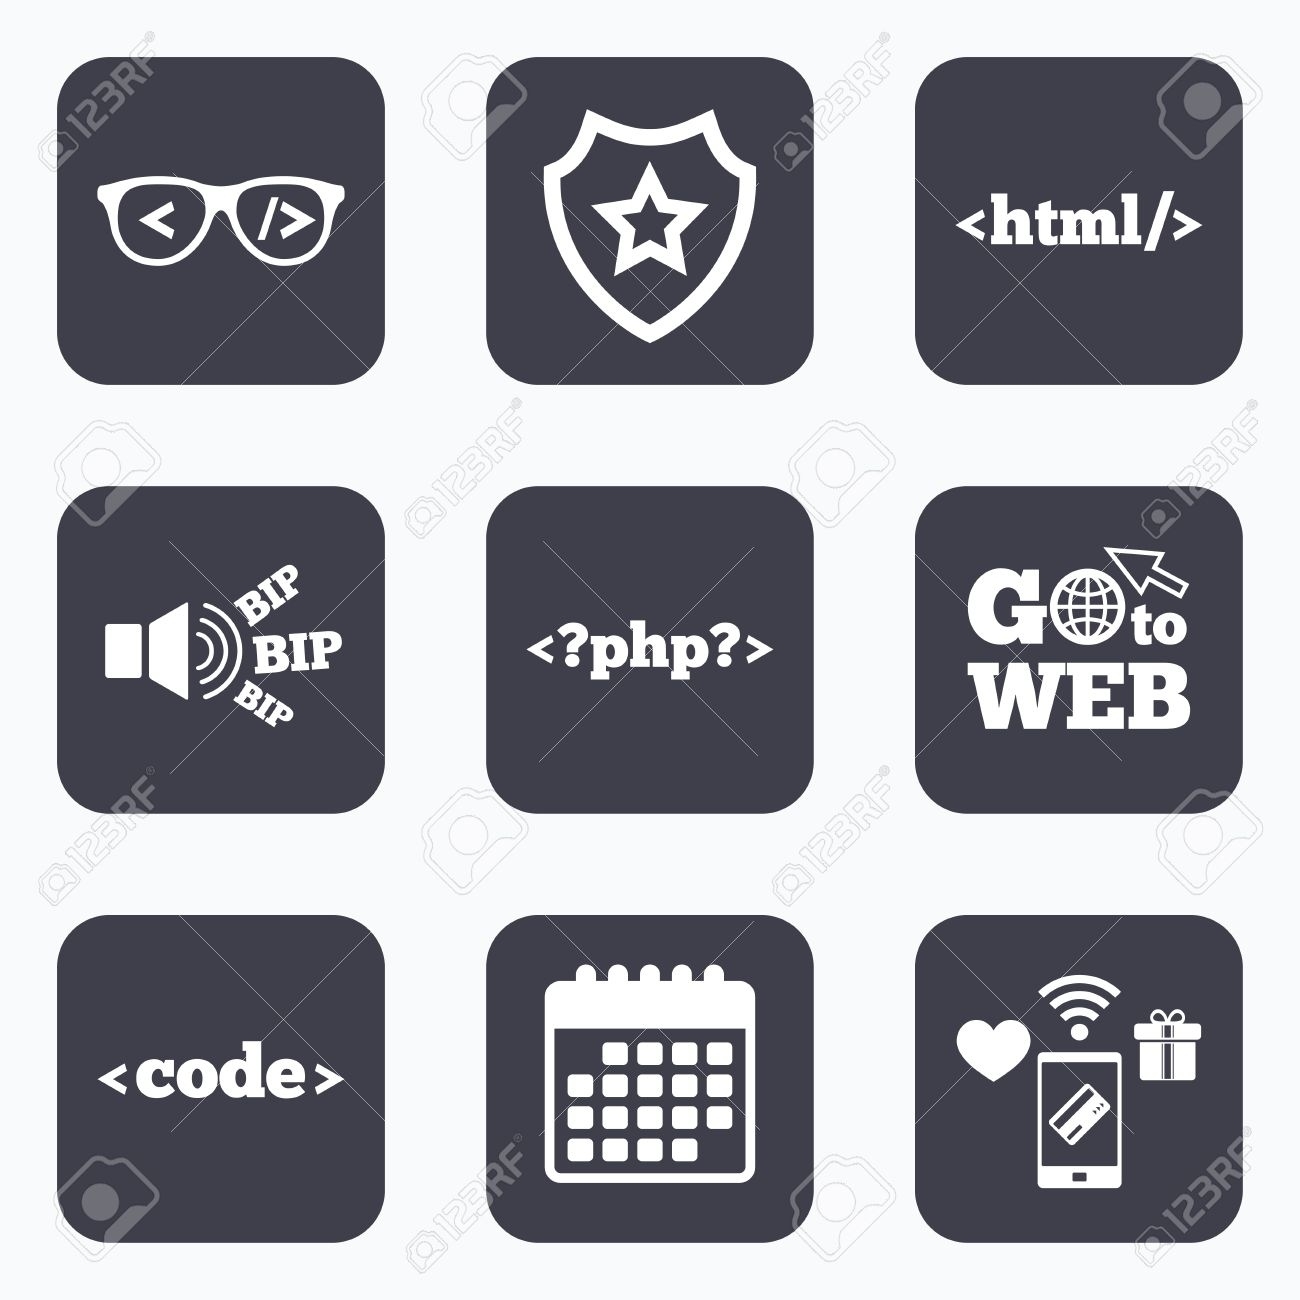 Mobile Payments, Wifi And Calendar Icons. Programmer Coder Glasses Calendar Icon Code In Html